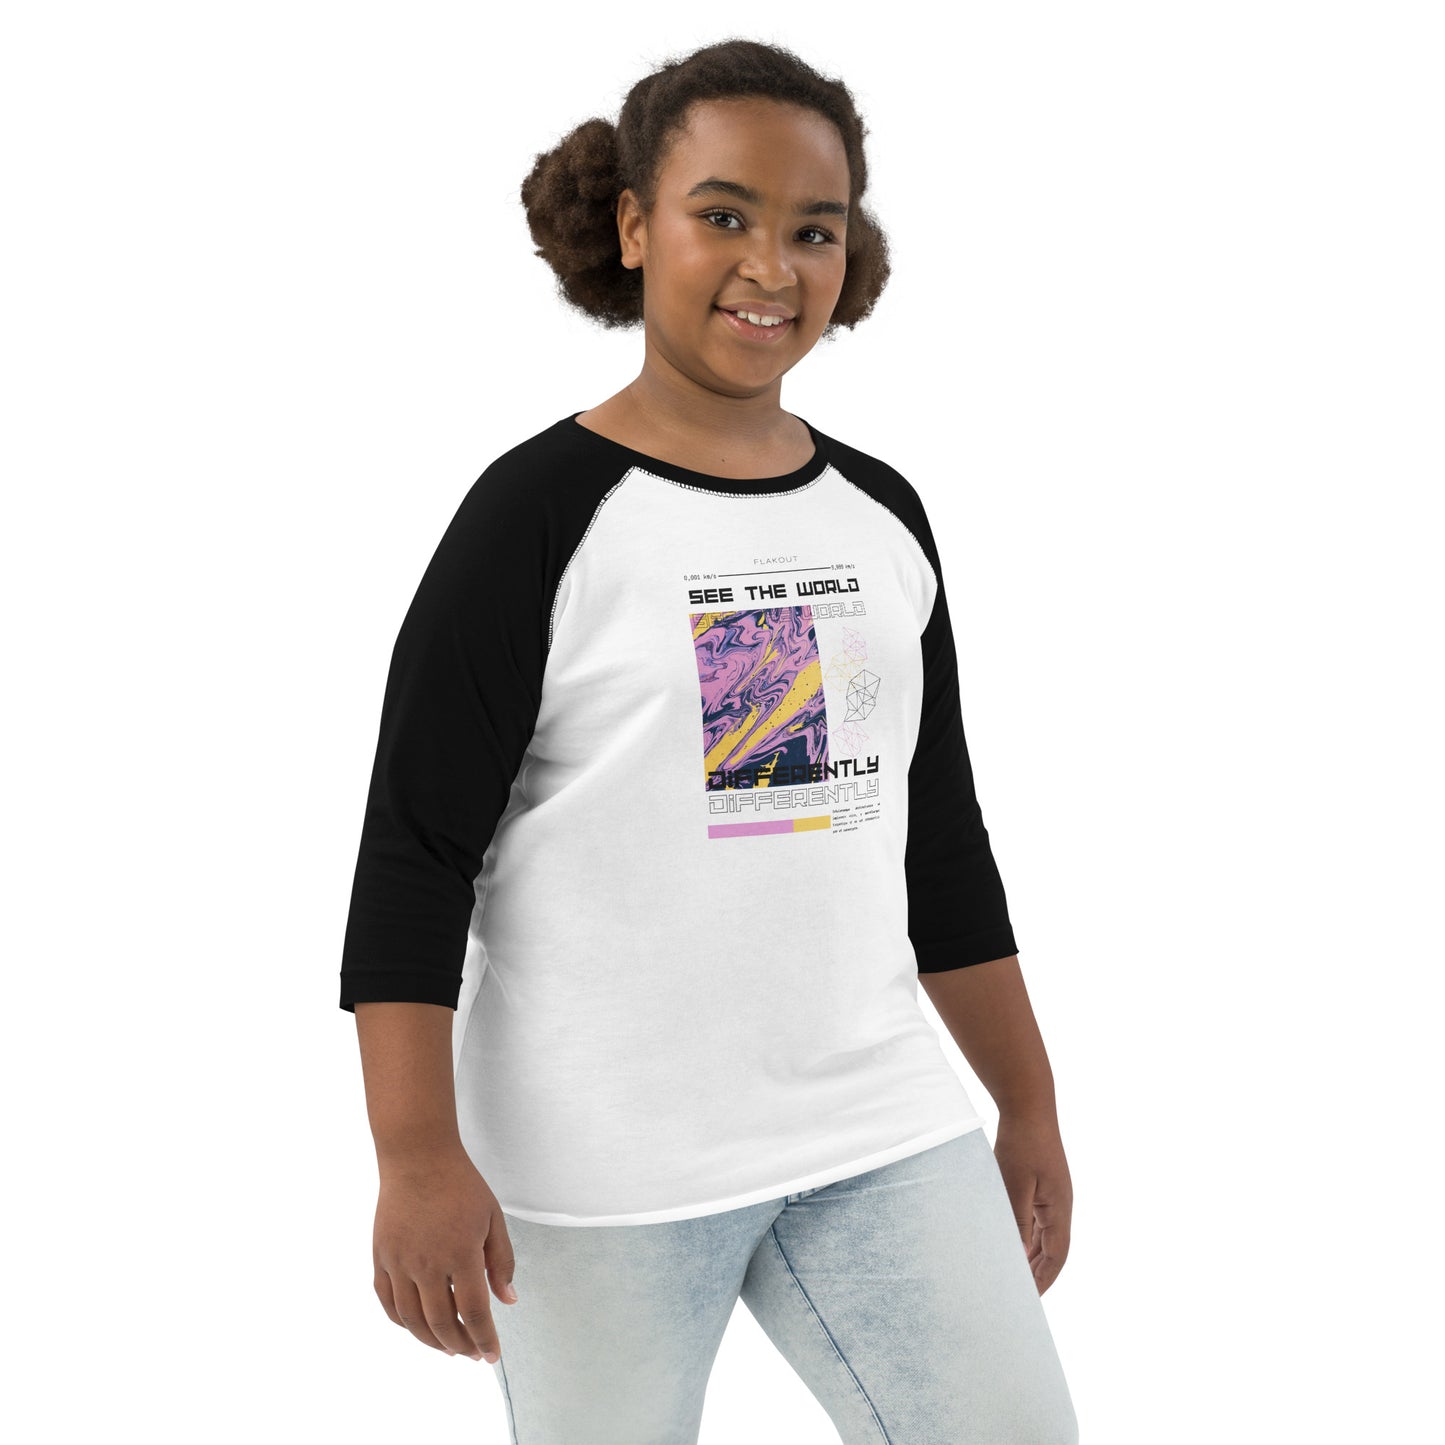 Divergent Horizon See The World Differently Kid's Long Sleeve Shirt